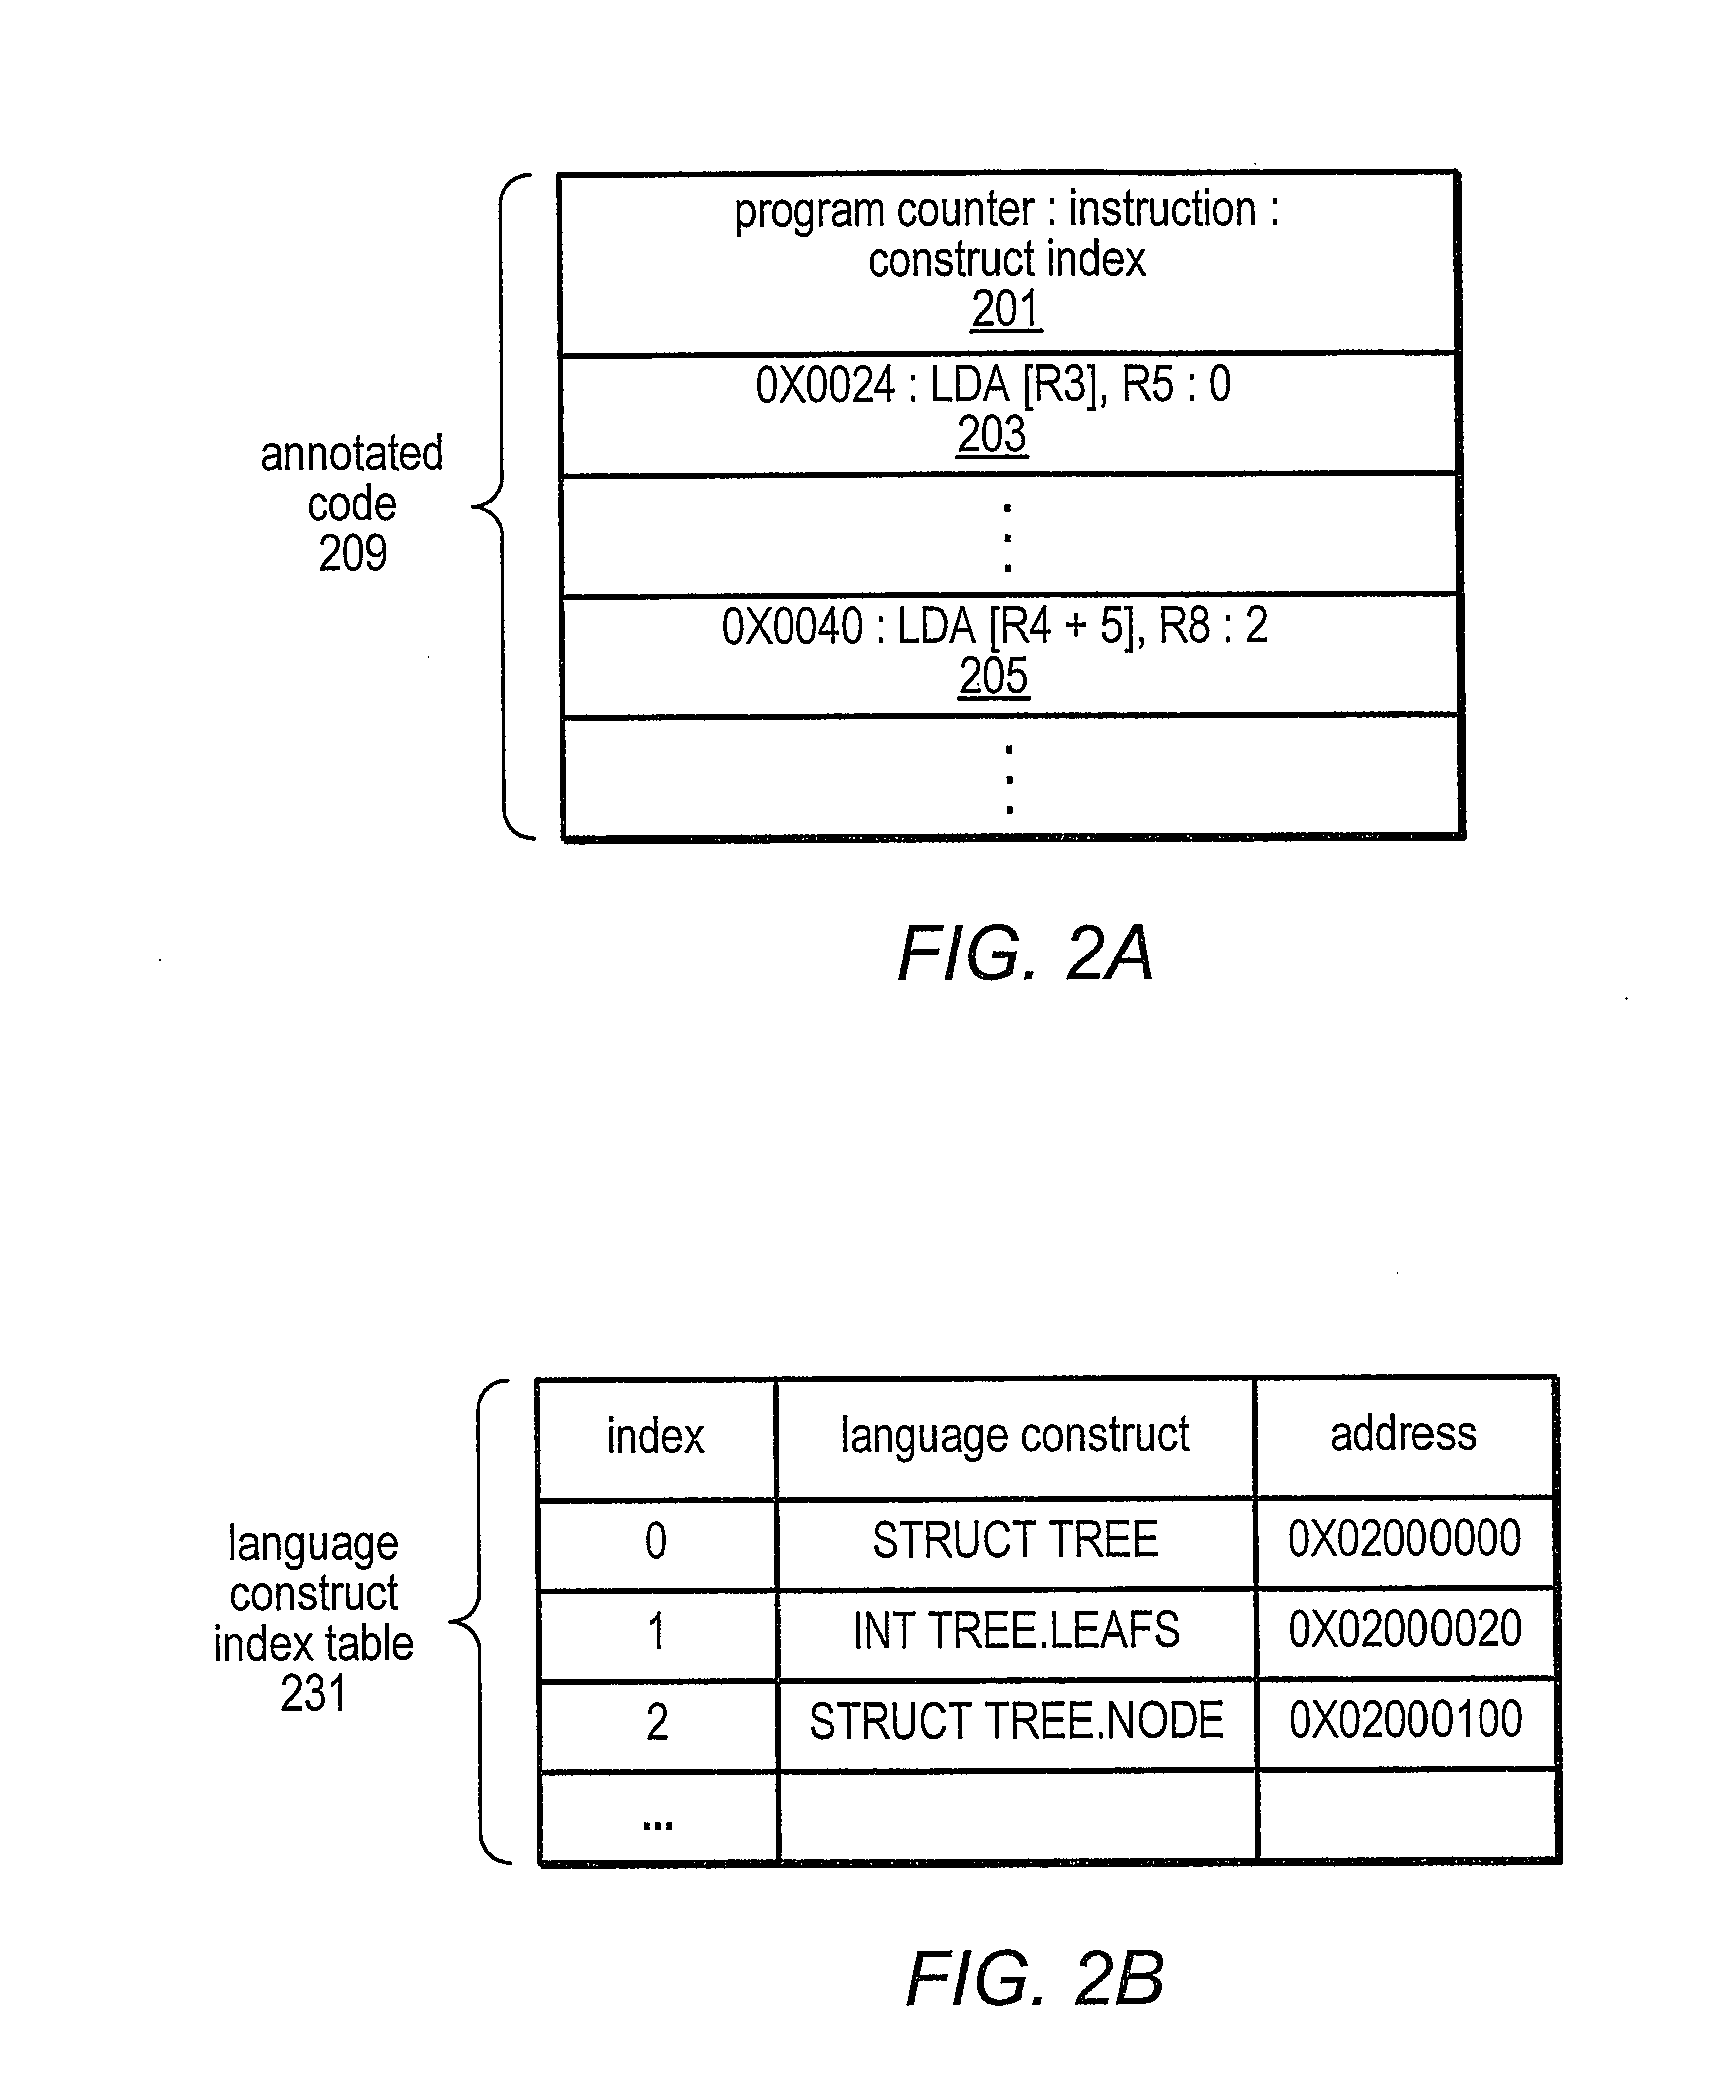 Method and Apparatus for Data Space Profiling of Applications Across a Network